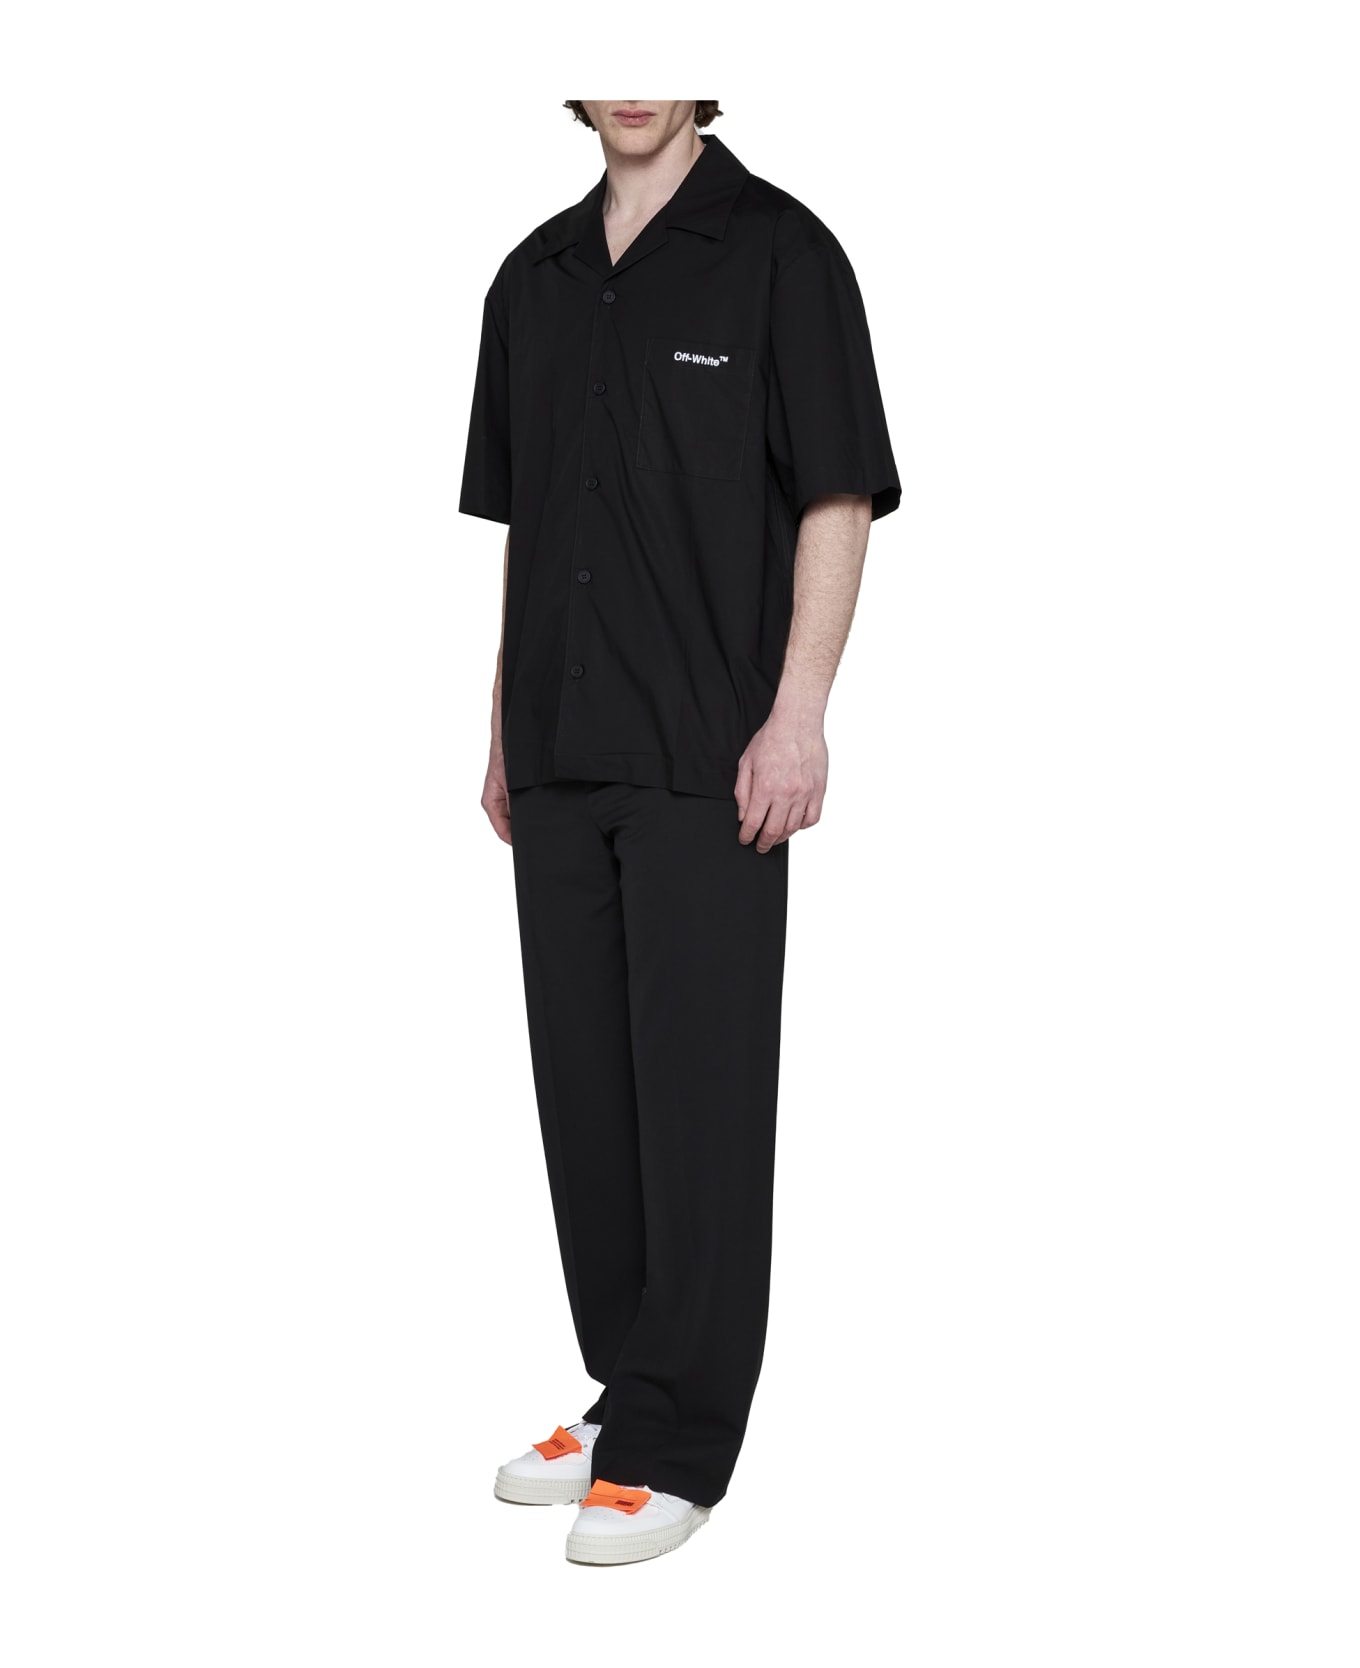 Off-White Embroidered Slim Zip Trousers - Black